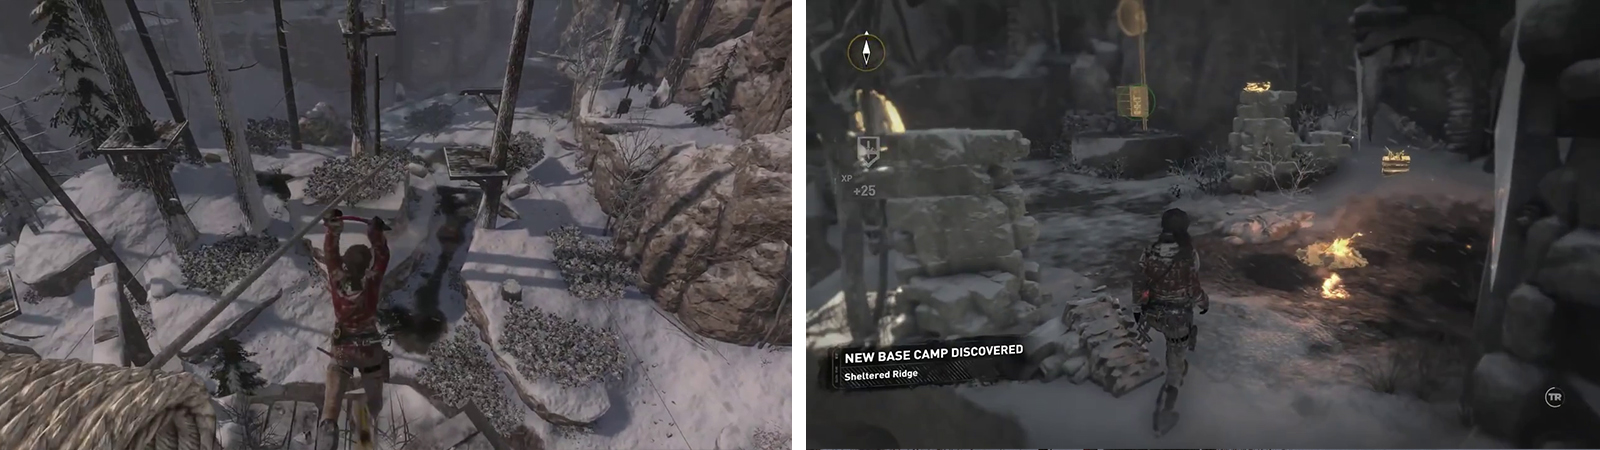 Youll see Repeater 04 on a ledge to the right as you zipline down from Repeater 02 (left). Repeater 05 can be found by a Base Camp (right).